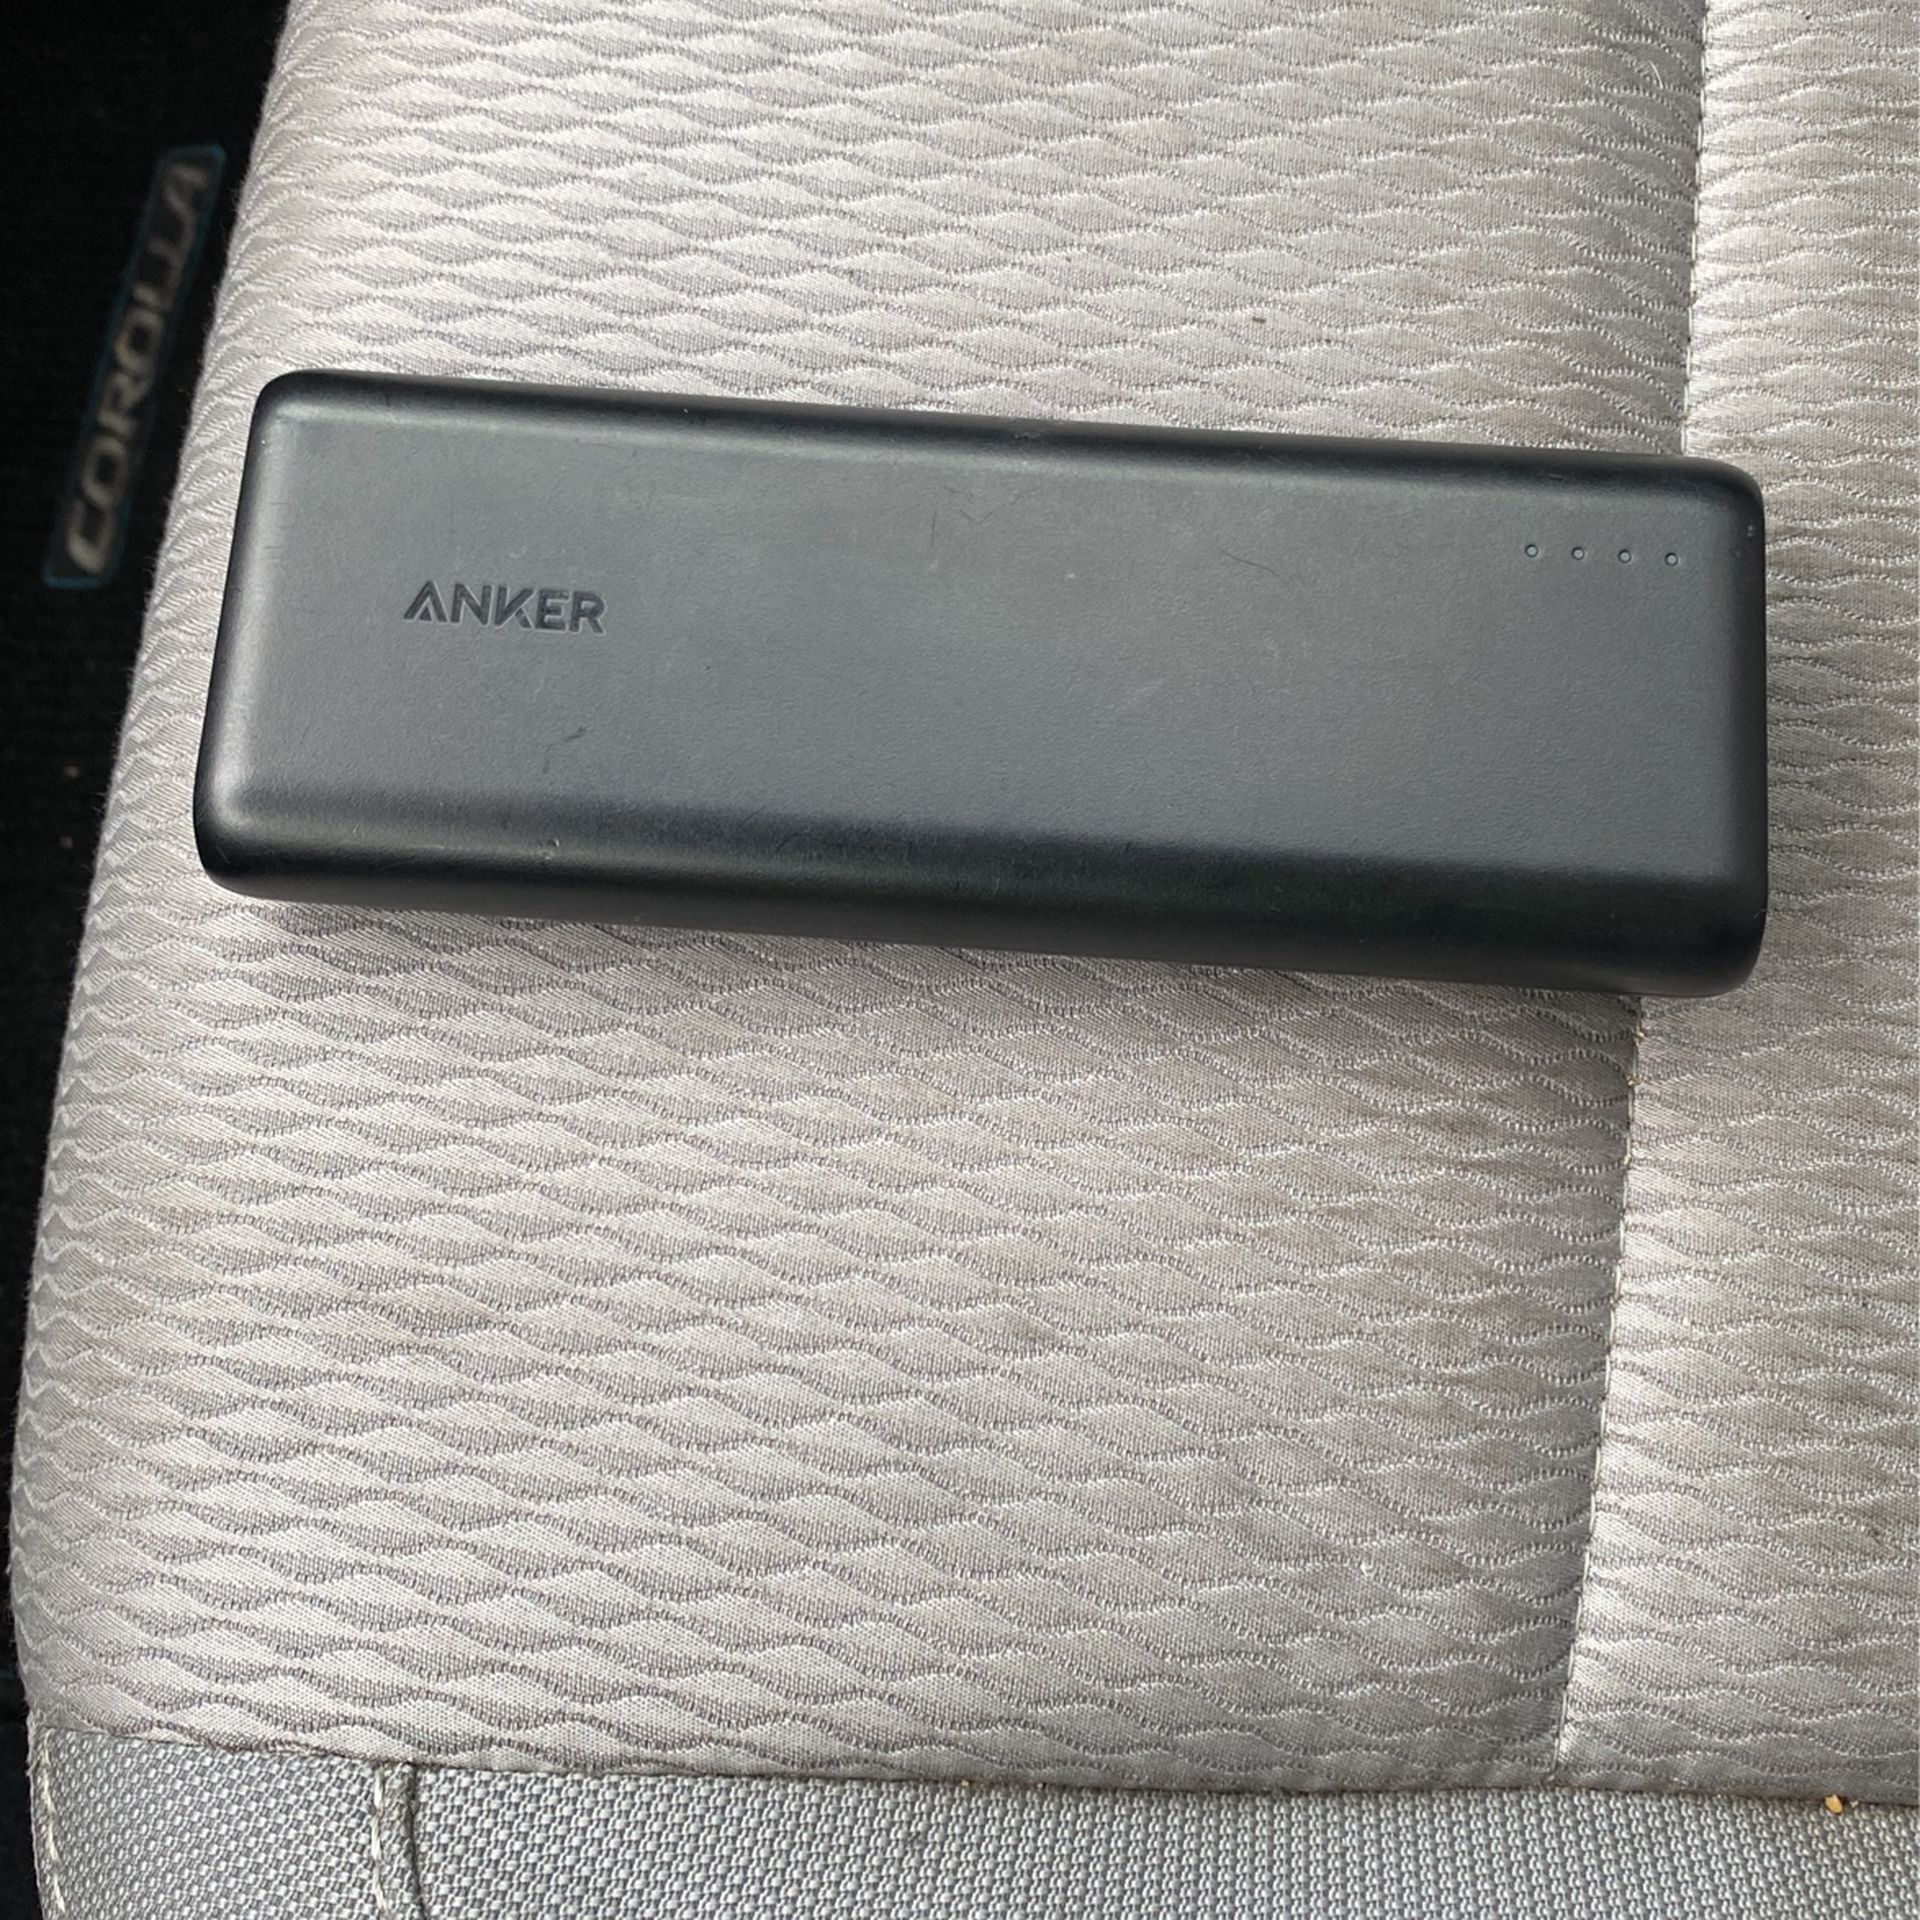 Anker charger 